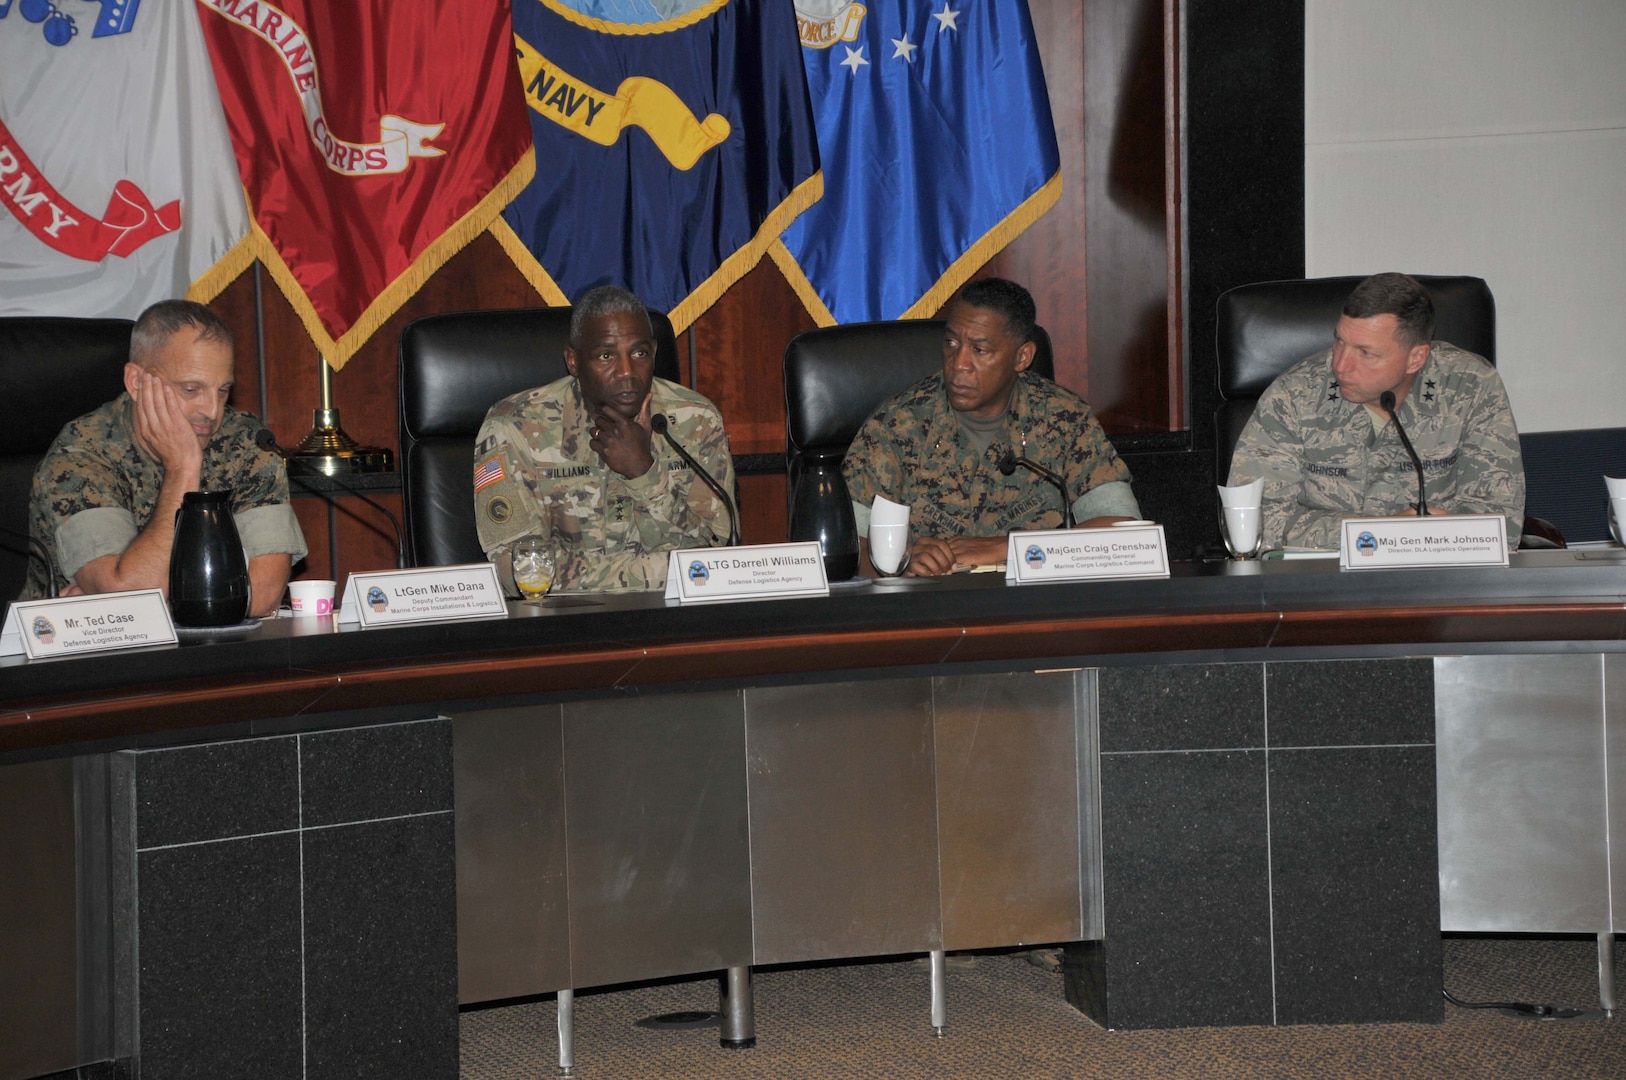 Four generals seated at table, facing viewer.